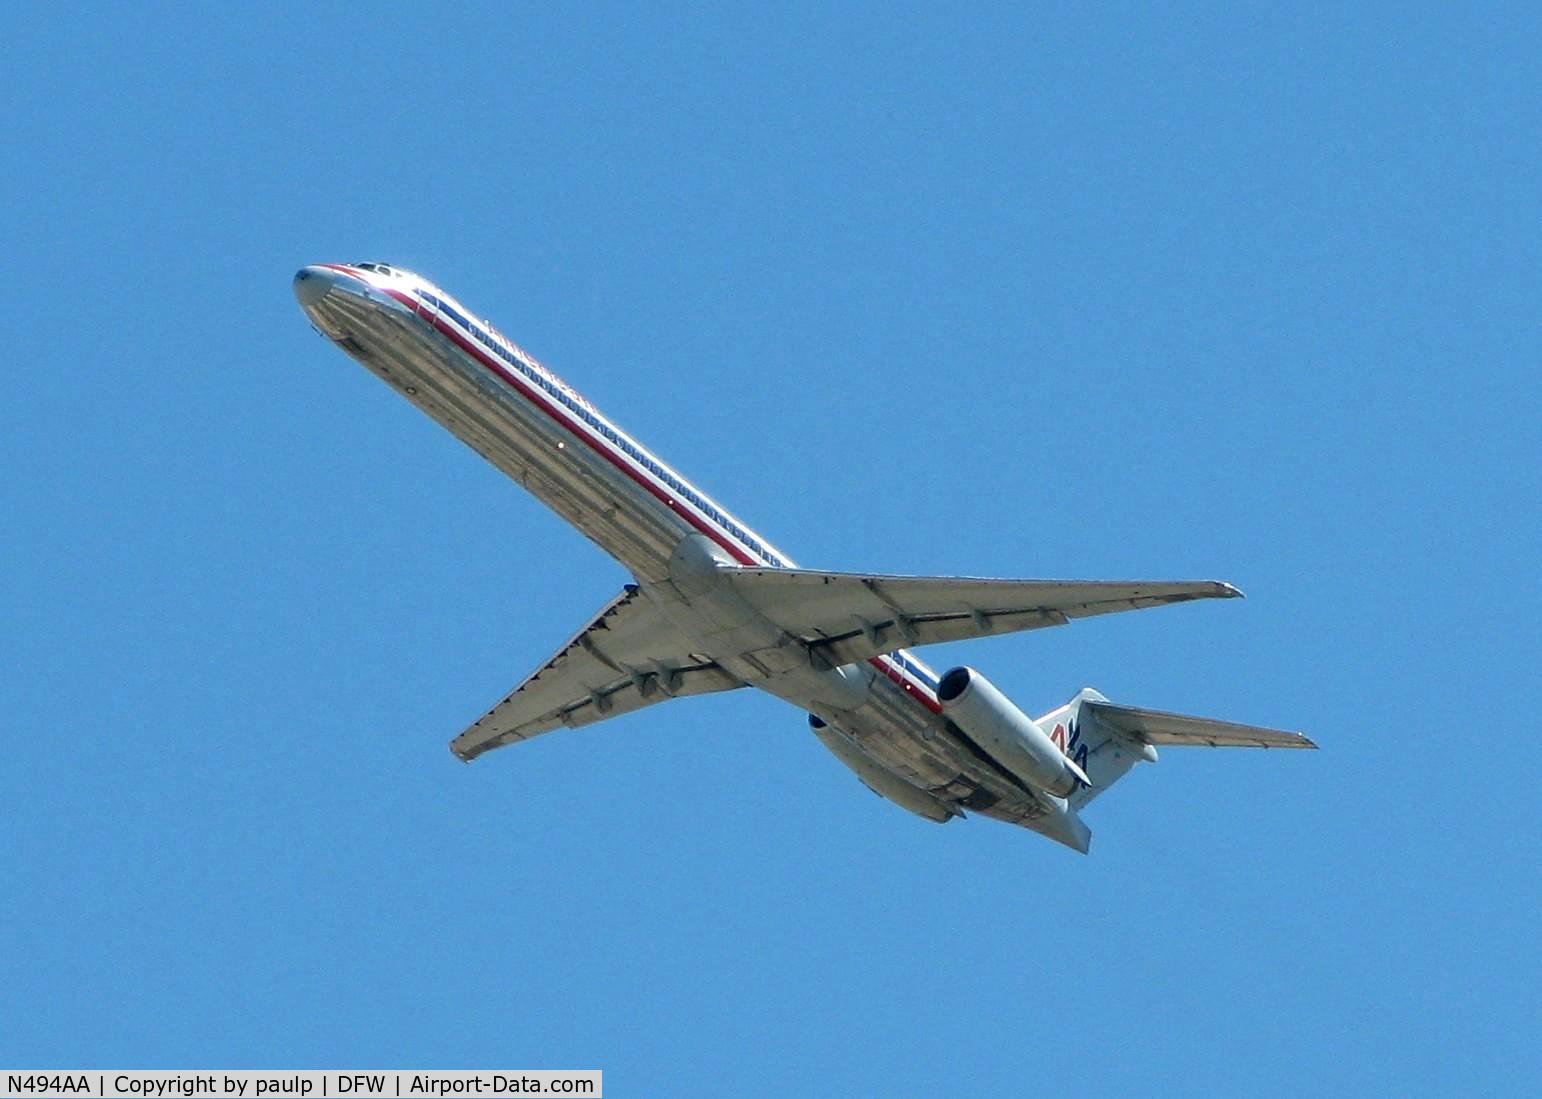 N494AA, 1989 McDonnell Douglas MD-82 (DC-9-82) C/N 49732, Off of 36R at DFW.